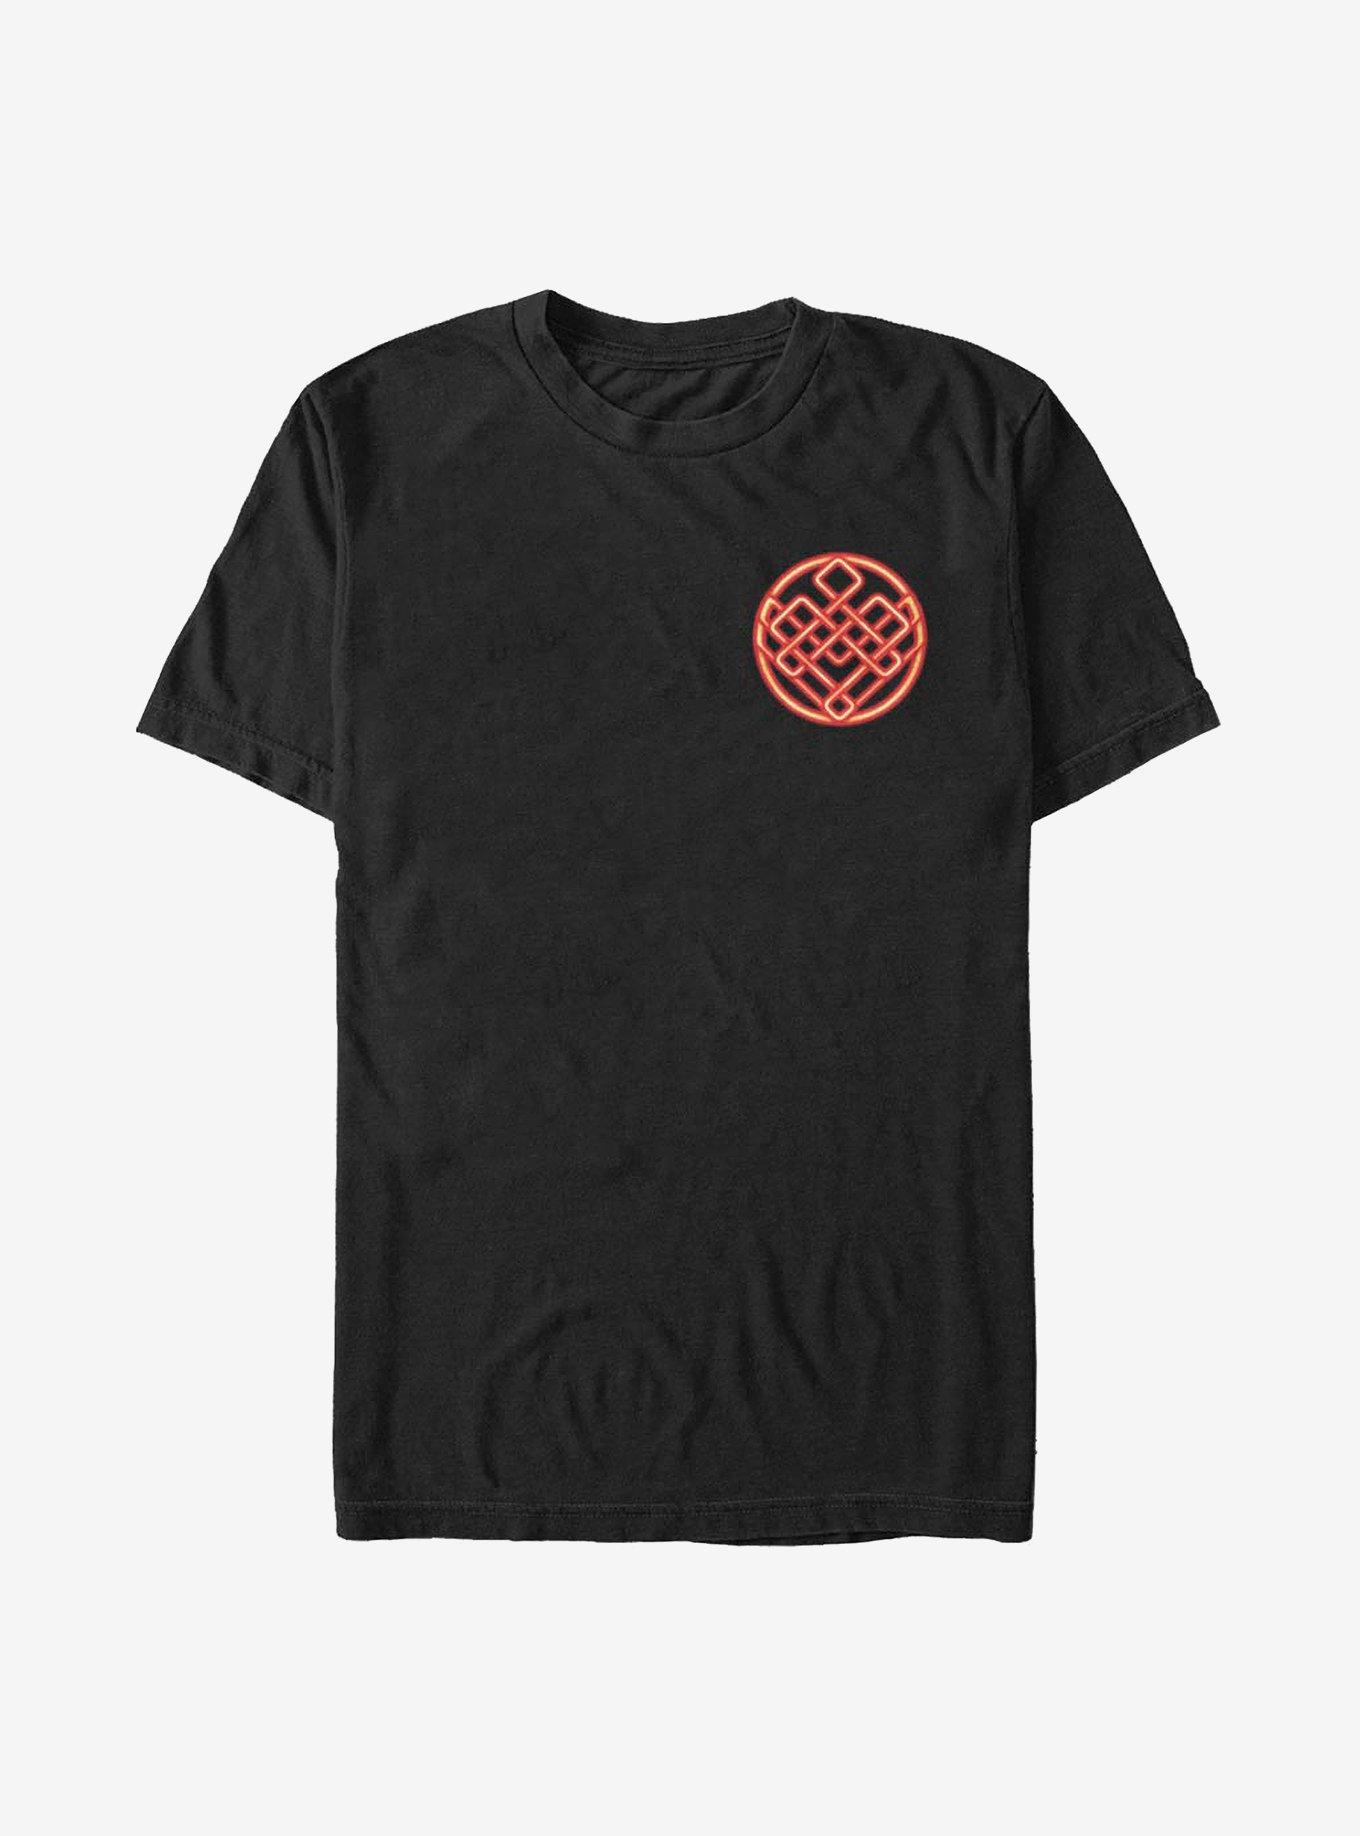 Marvel Shang-Chi And The Legend Of The Ten Rings Symbol Badge T-Shirt, BLACK, hi-res